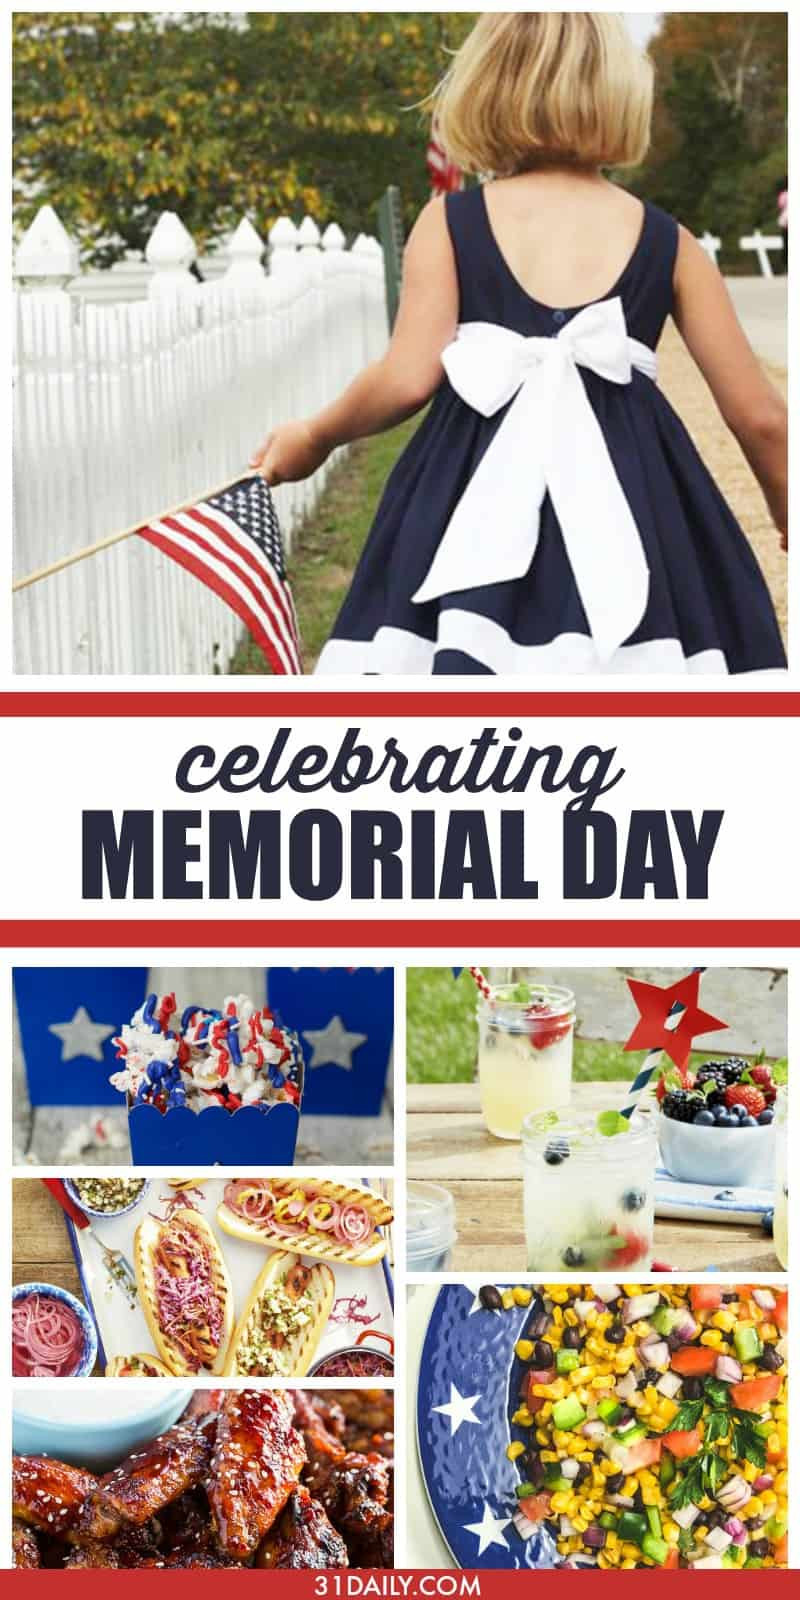 Memorial Day Meal Ideas
 Celebrating Memorial Day Food and Inspirations 31 Daily